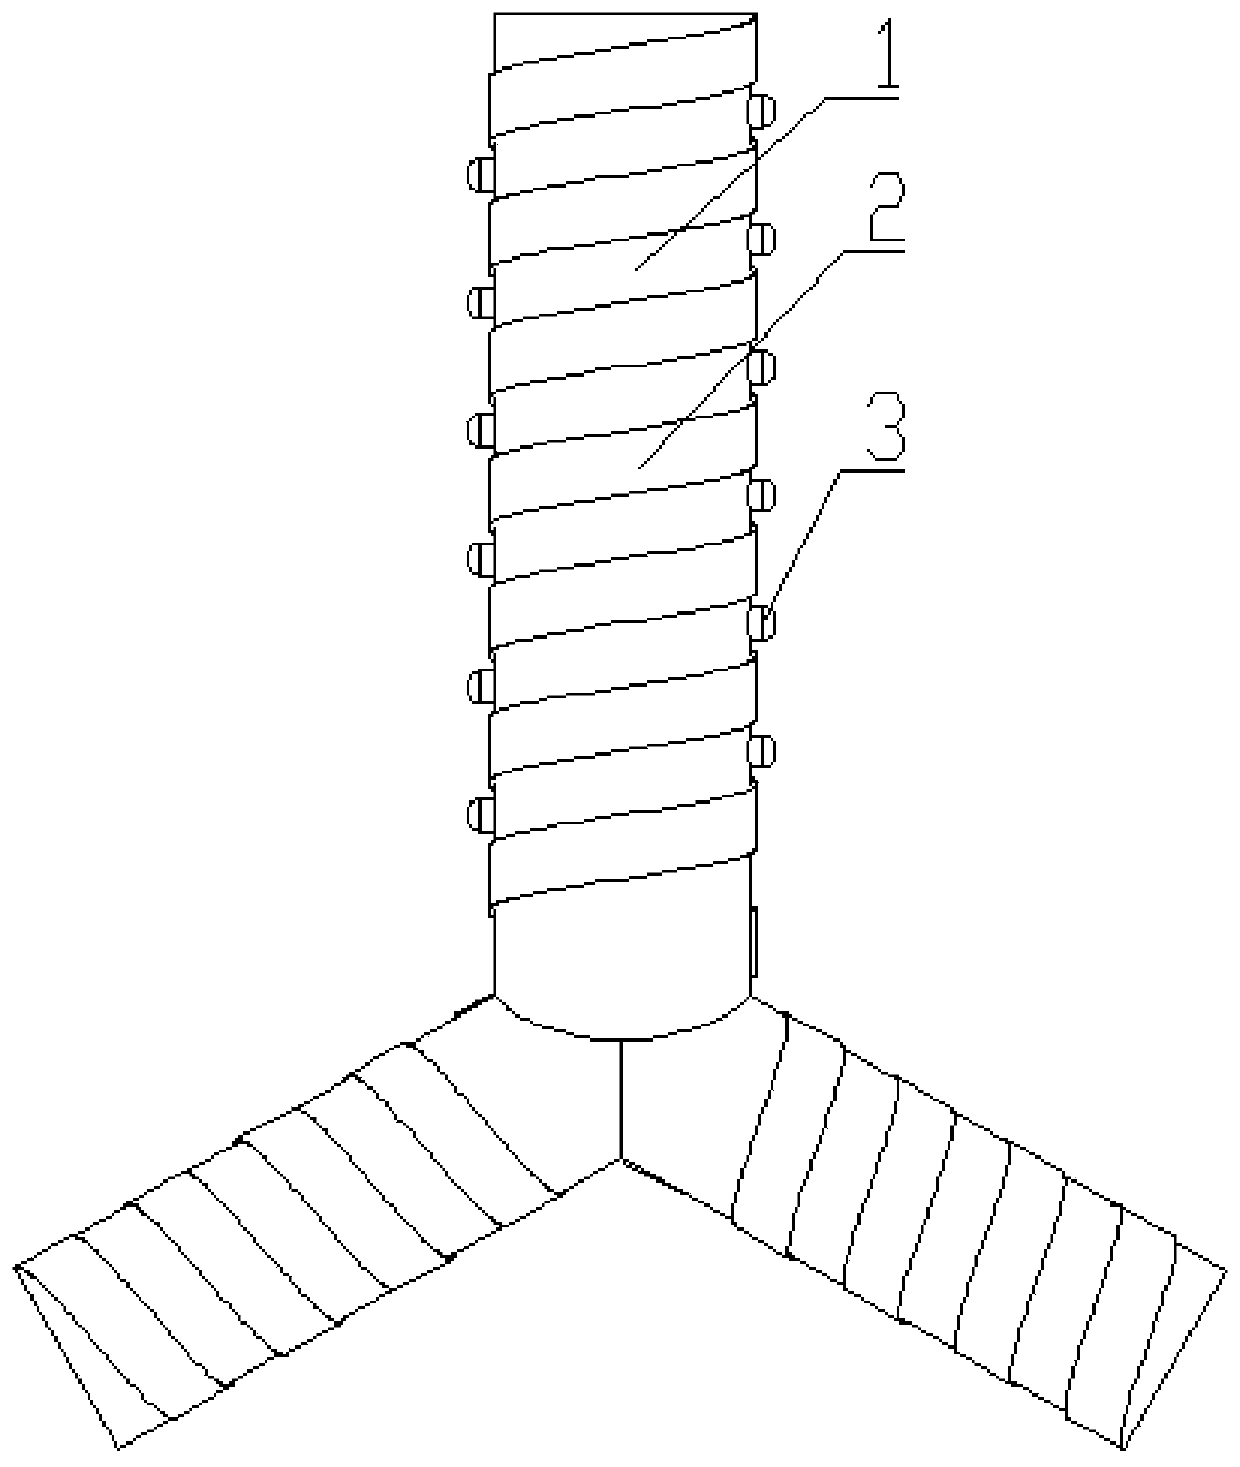 A method of manufacturing a controllable antibacterial tracheal stent